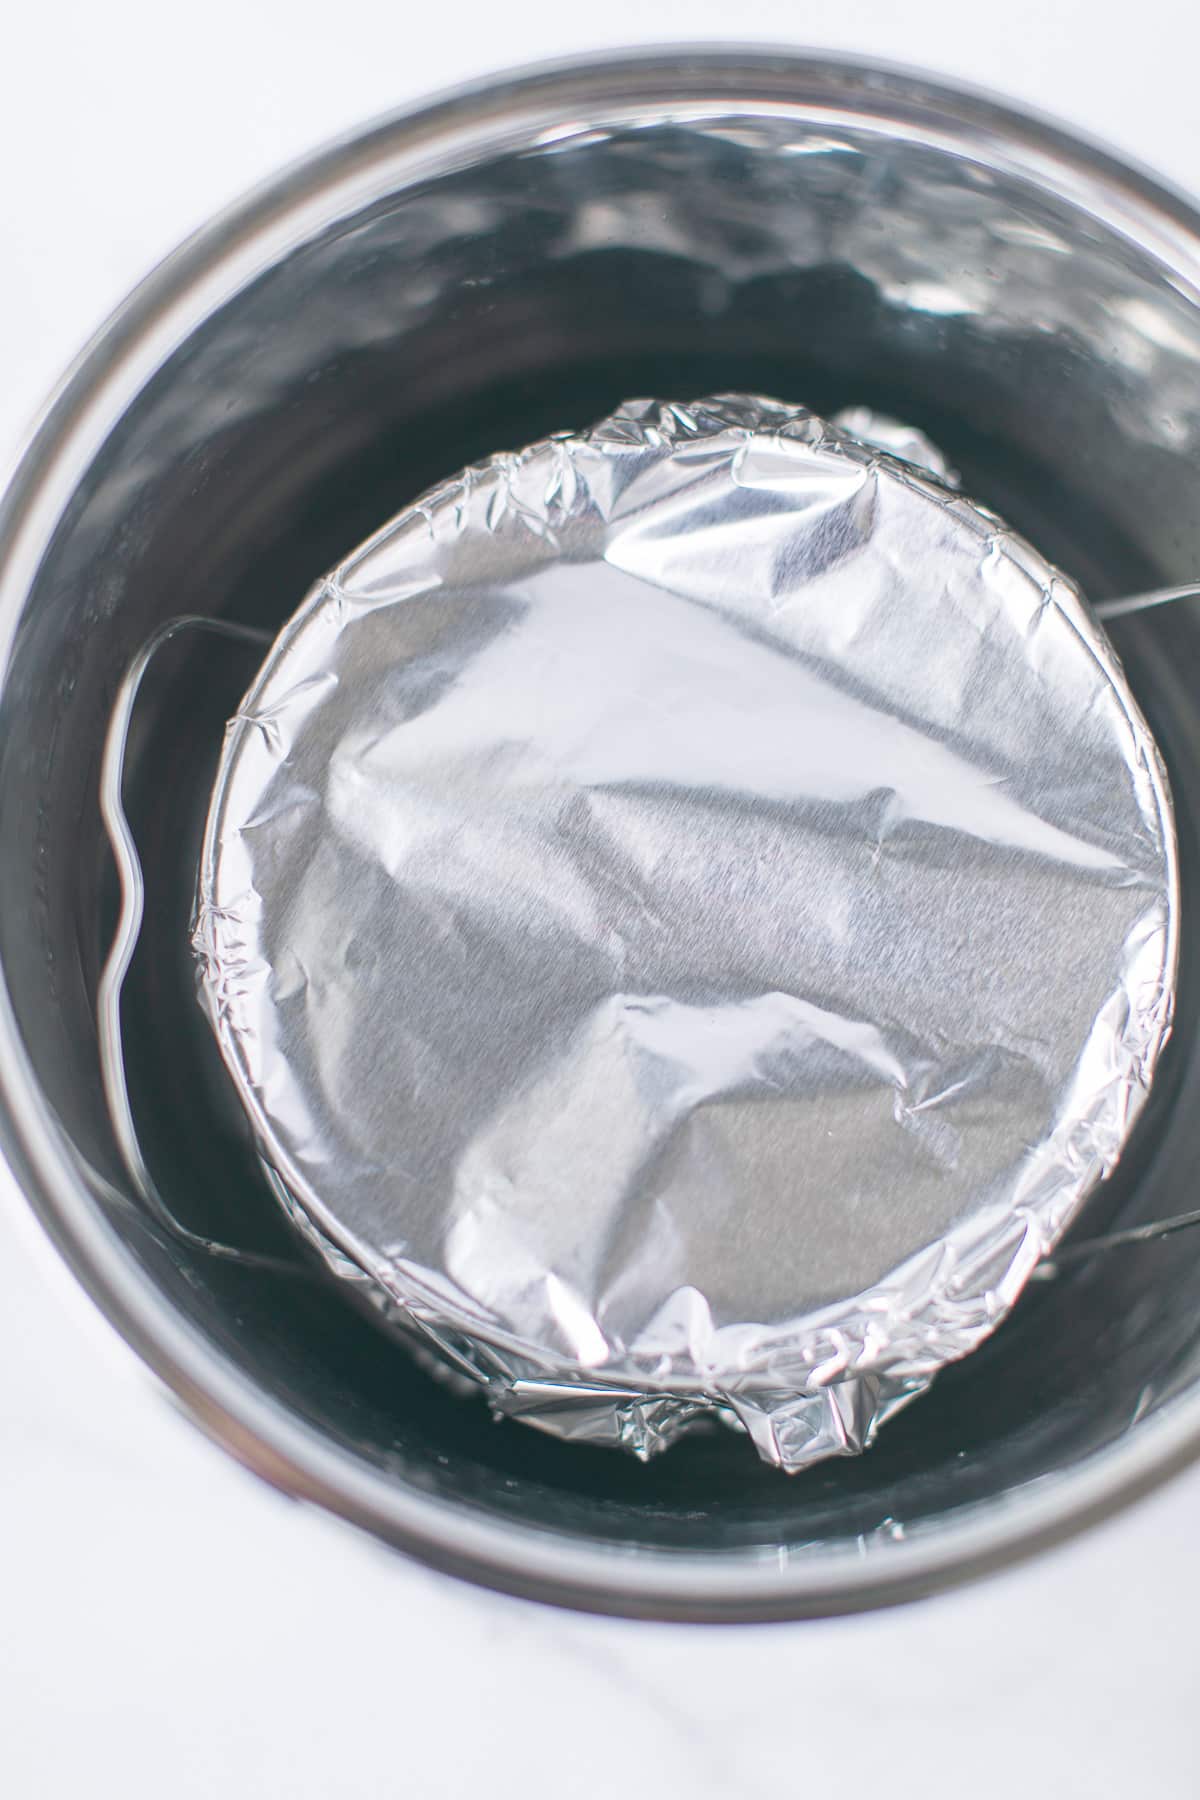 cake pan wrapped in foil inside the instant pot pressure cooker